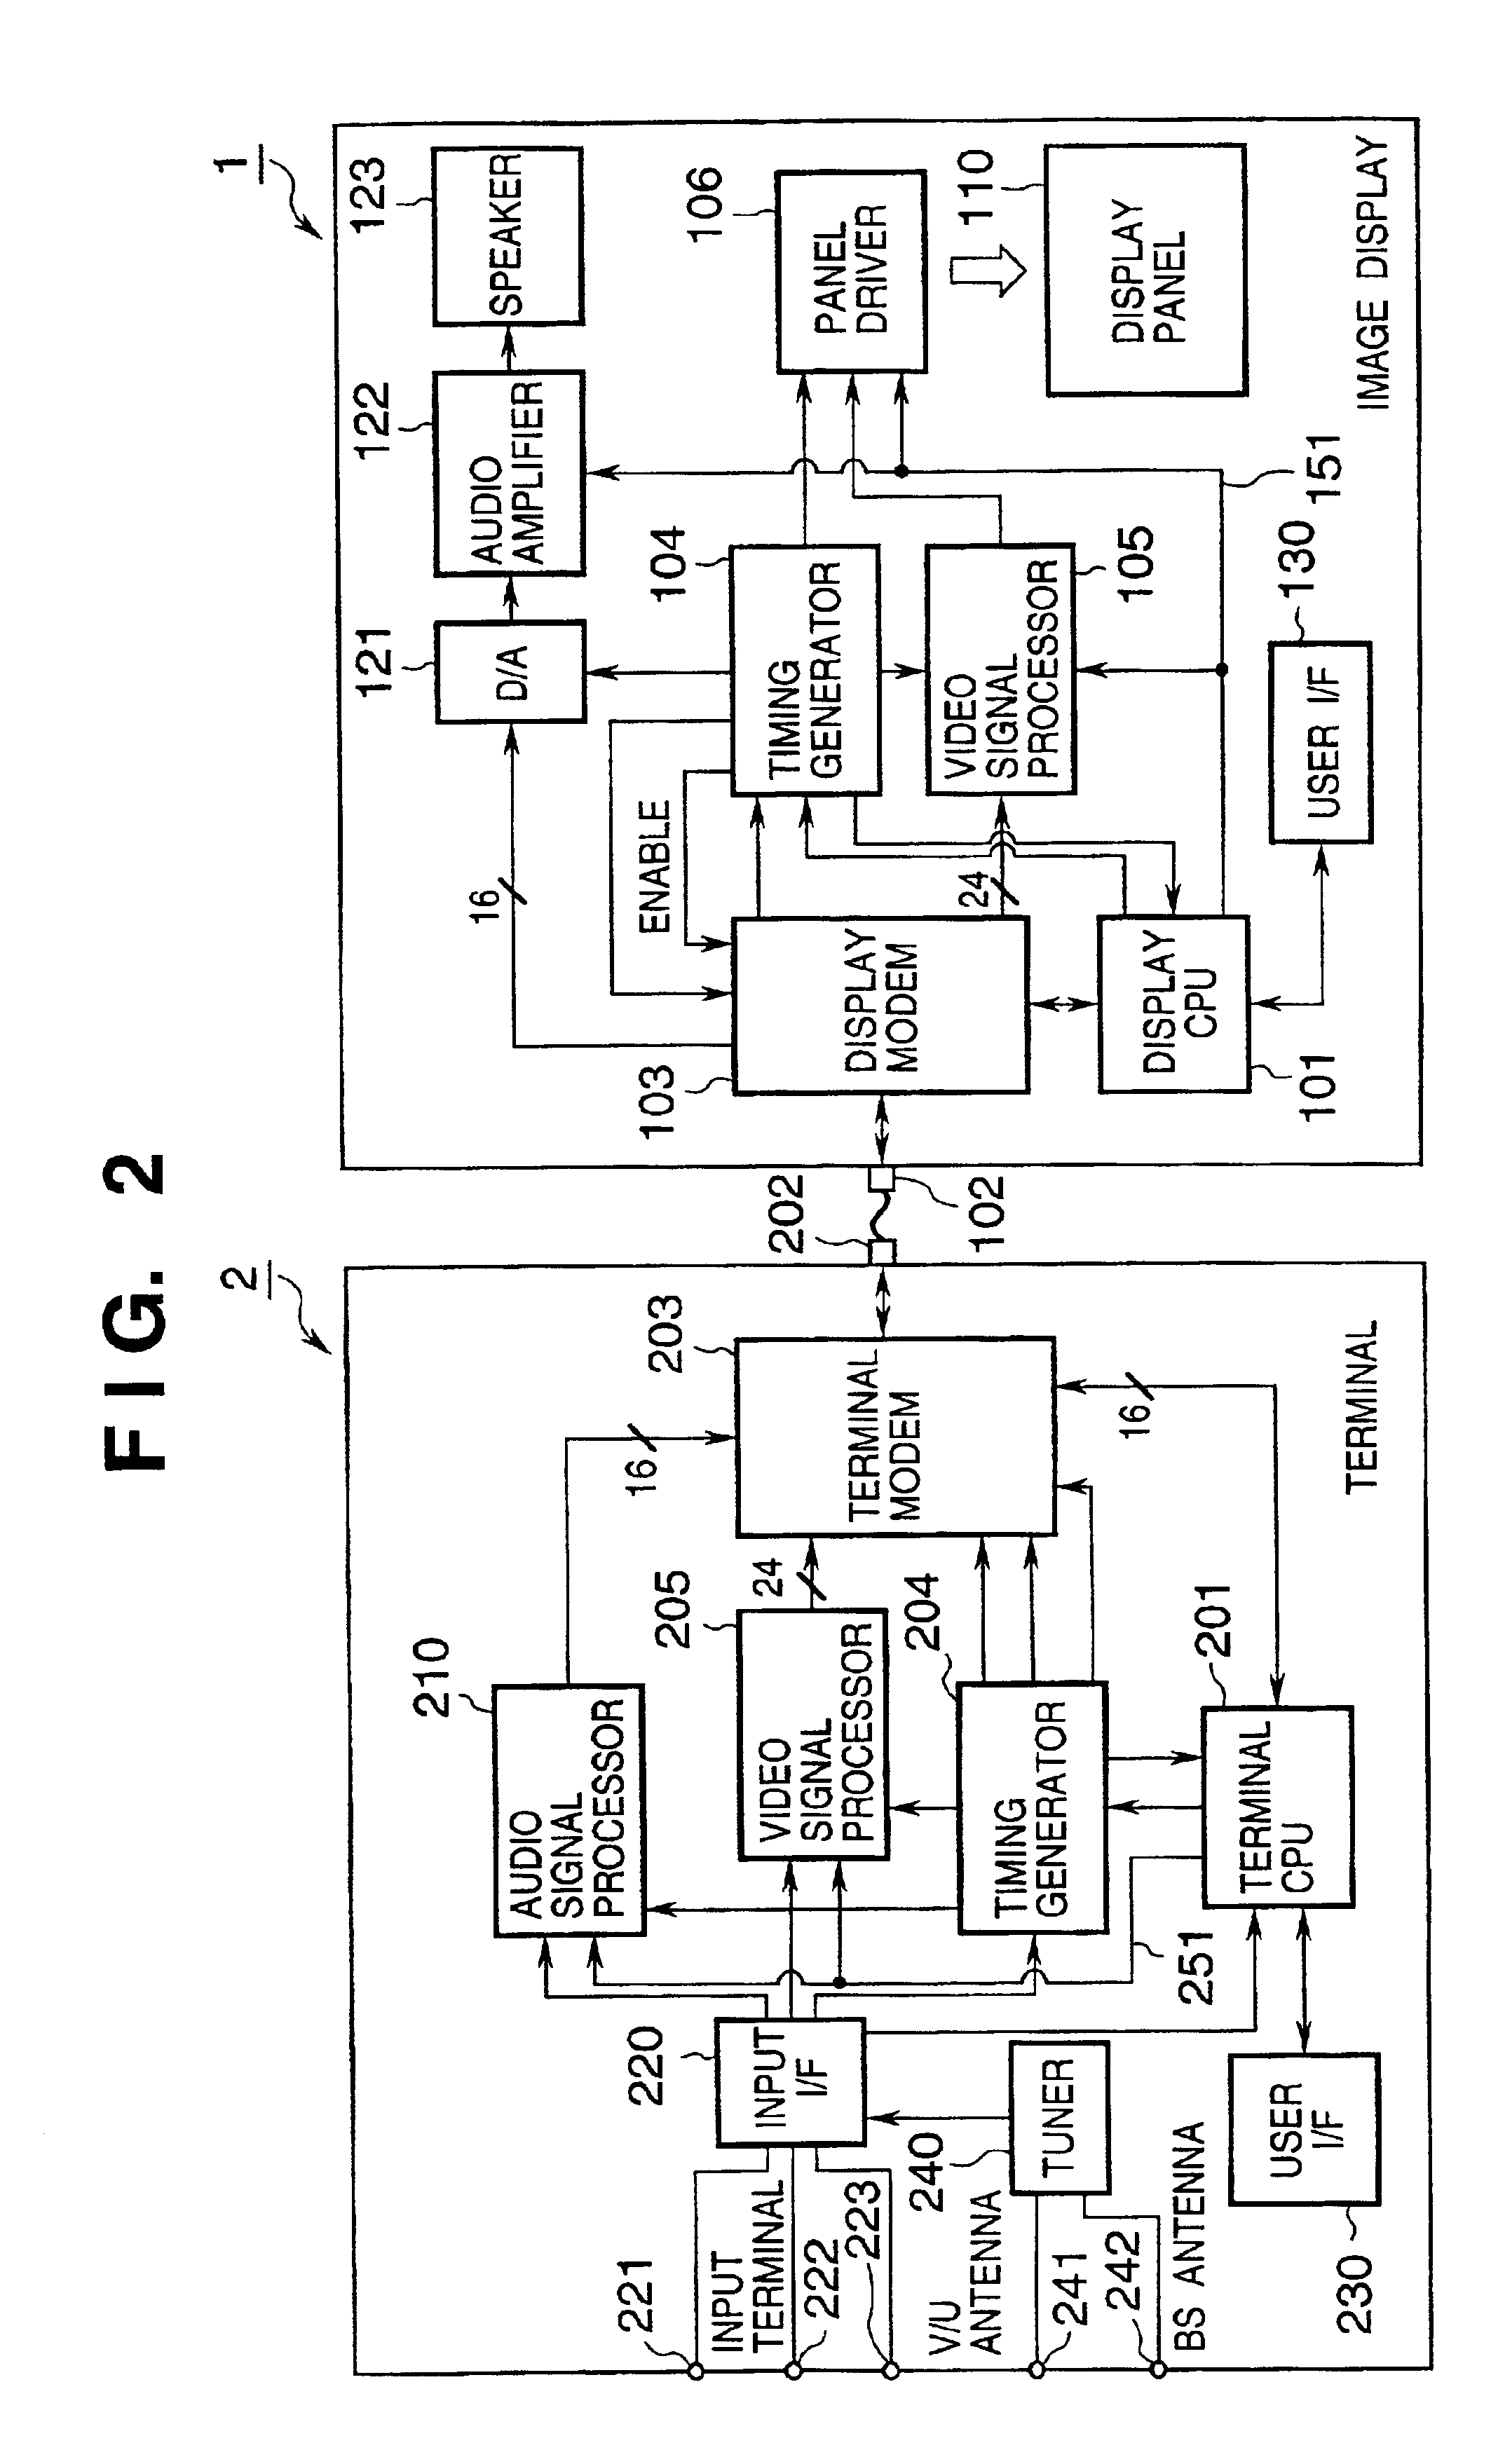 Image display control system and method allowing connection of various kinds of image displays to one supply source